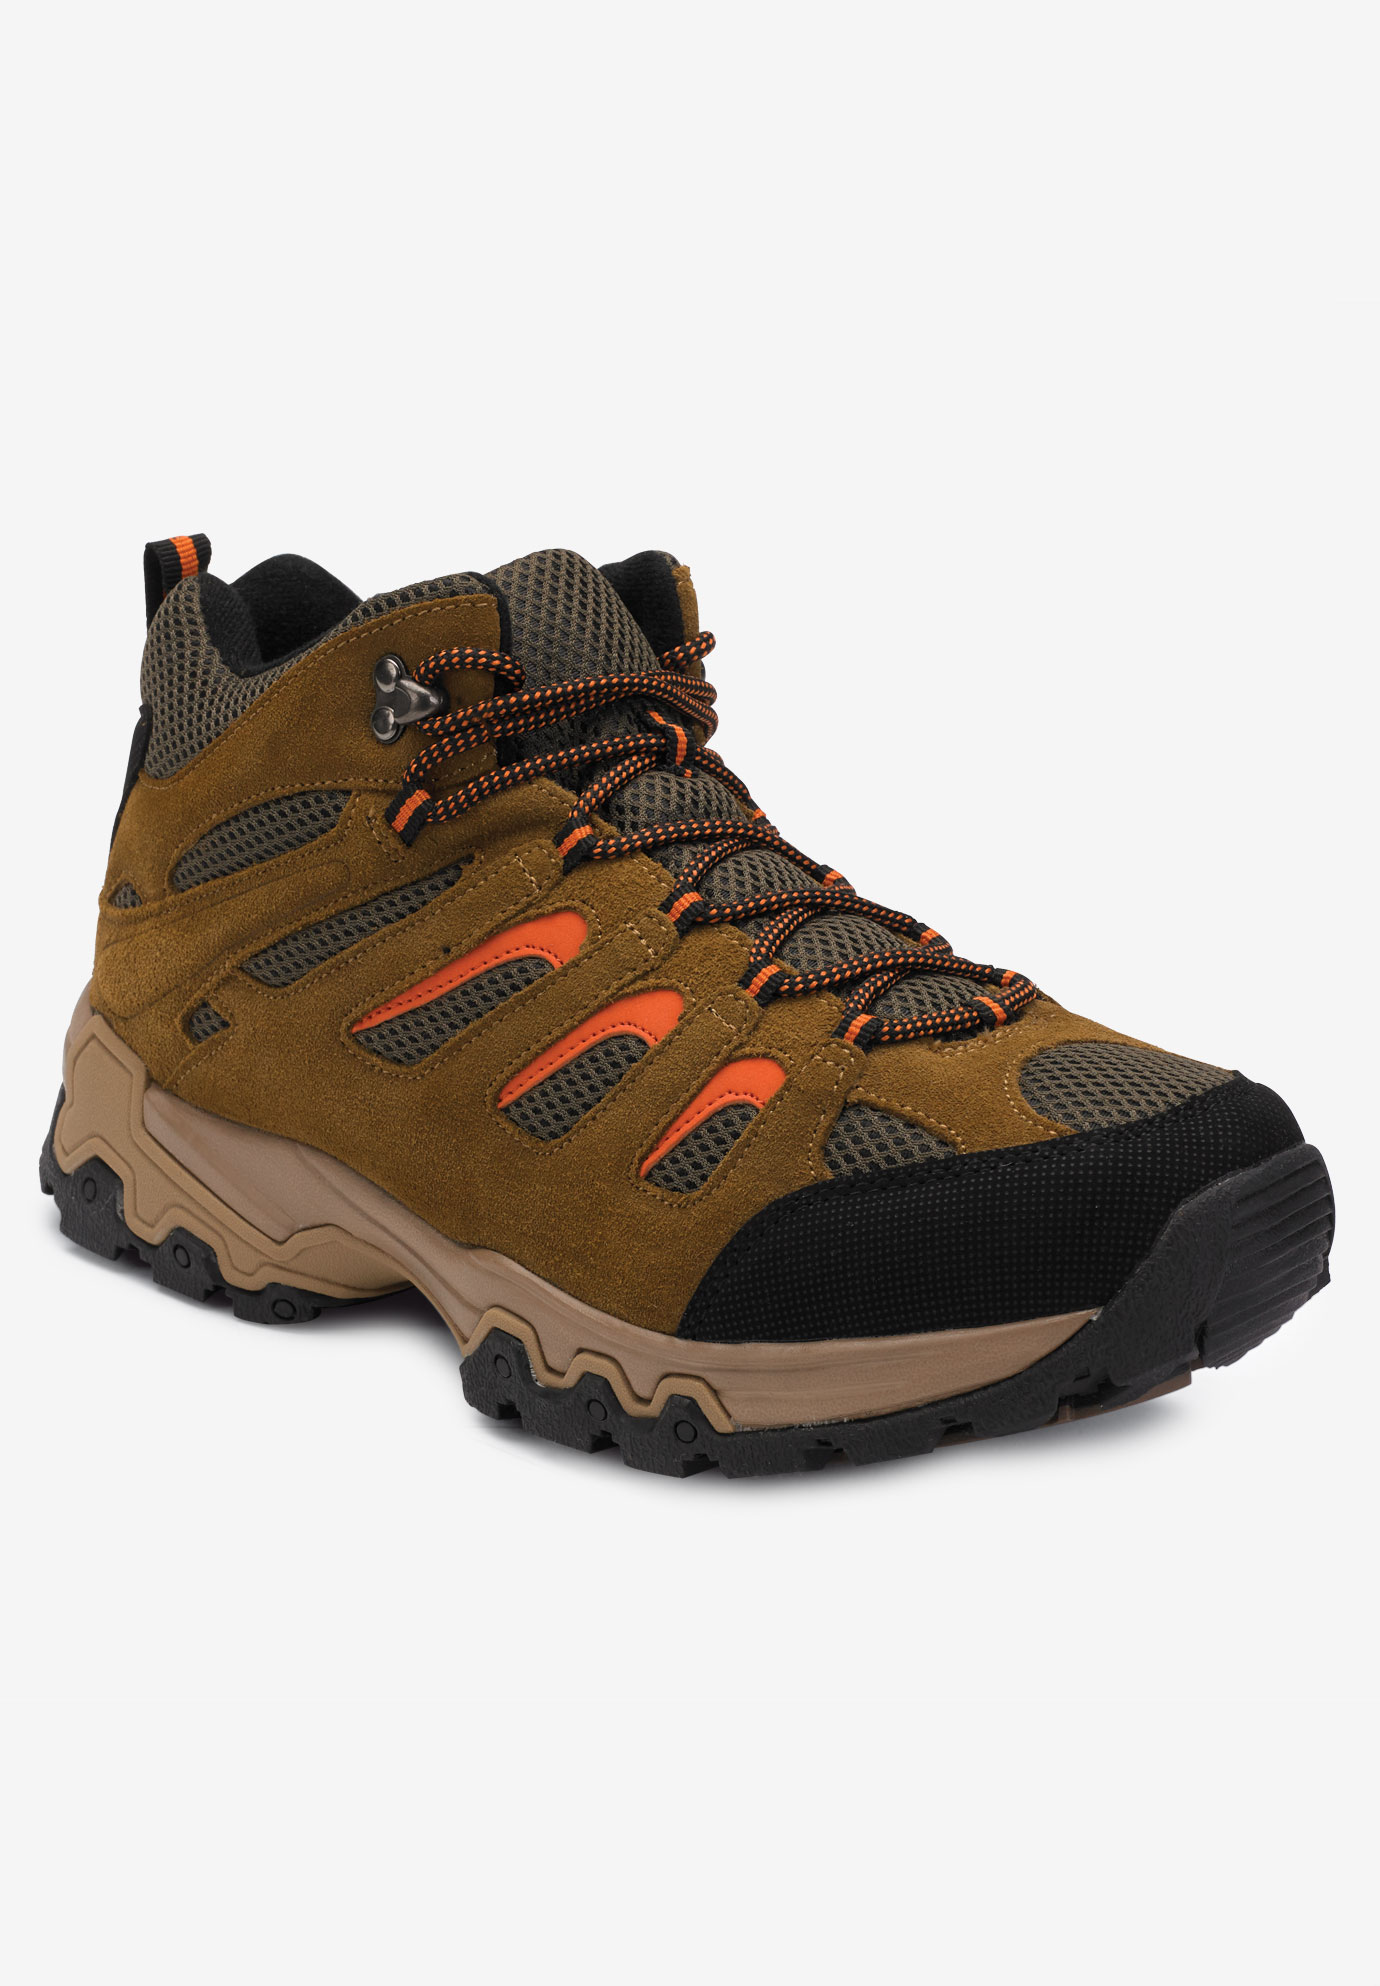 Rugged Lace-up Hiking Boots by Boulder Creek®| Big and Tall Shoes ...